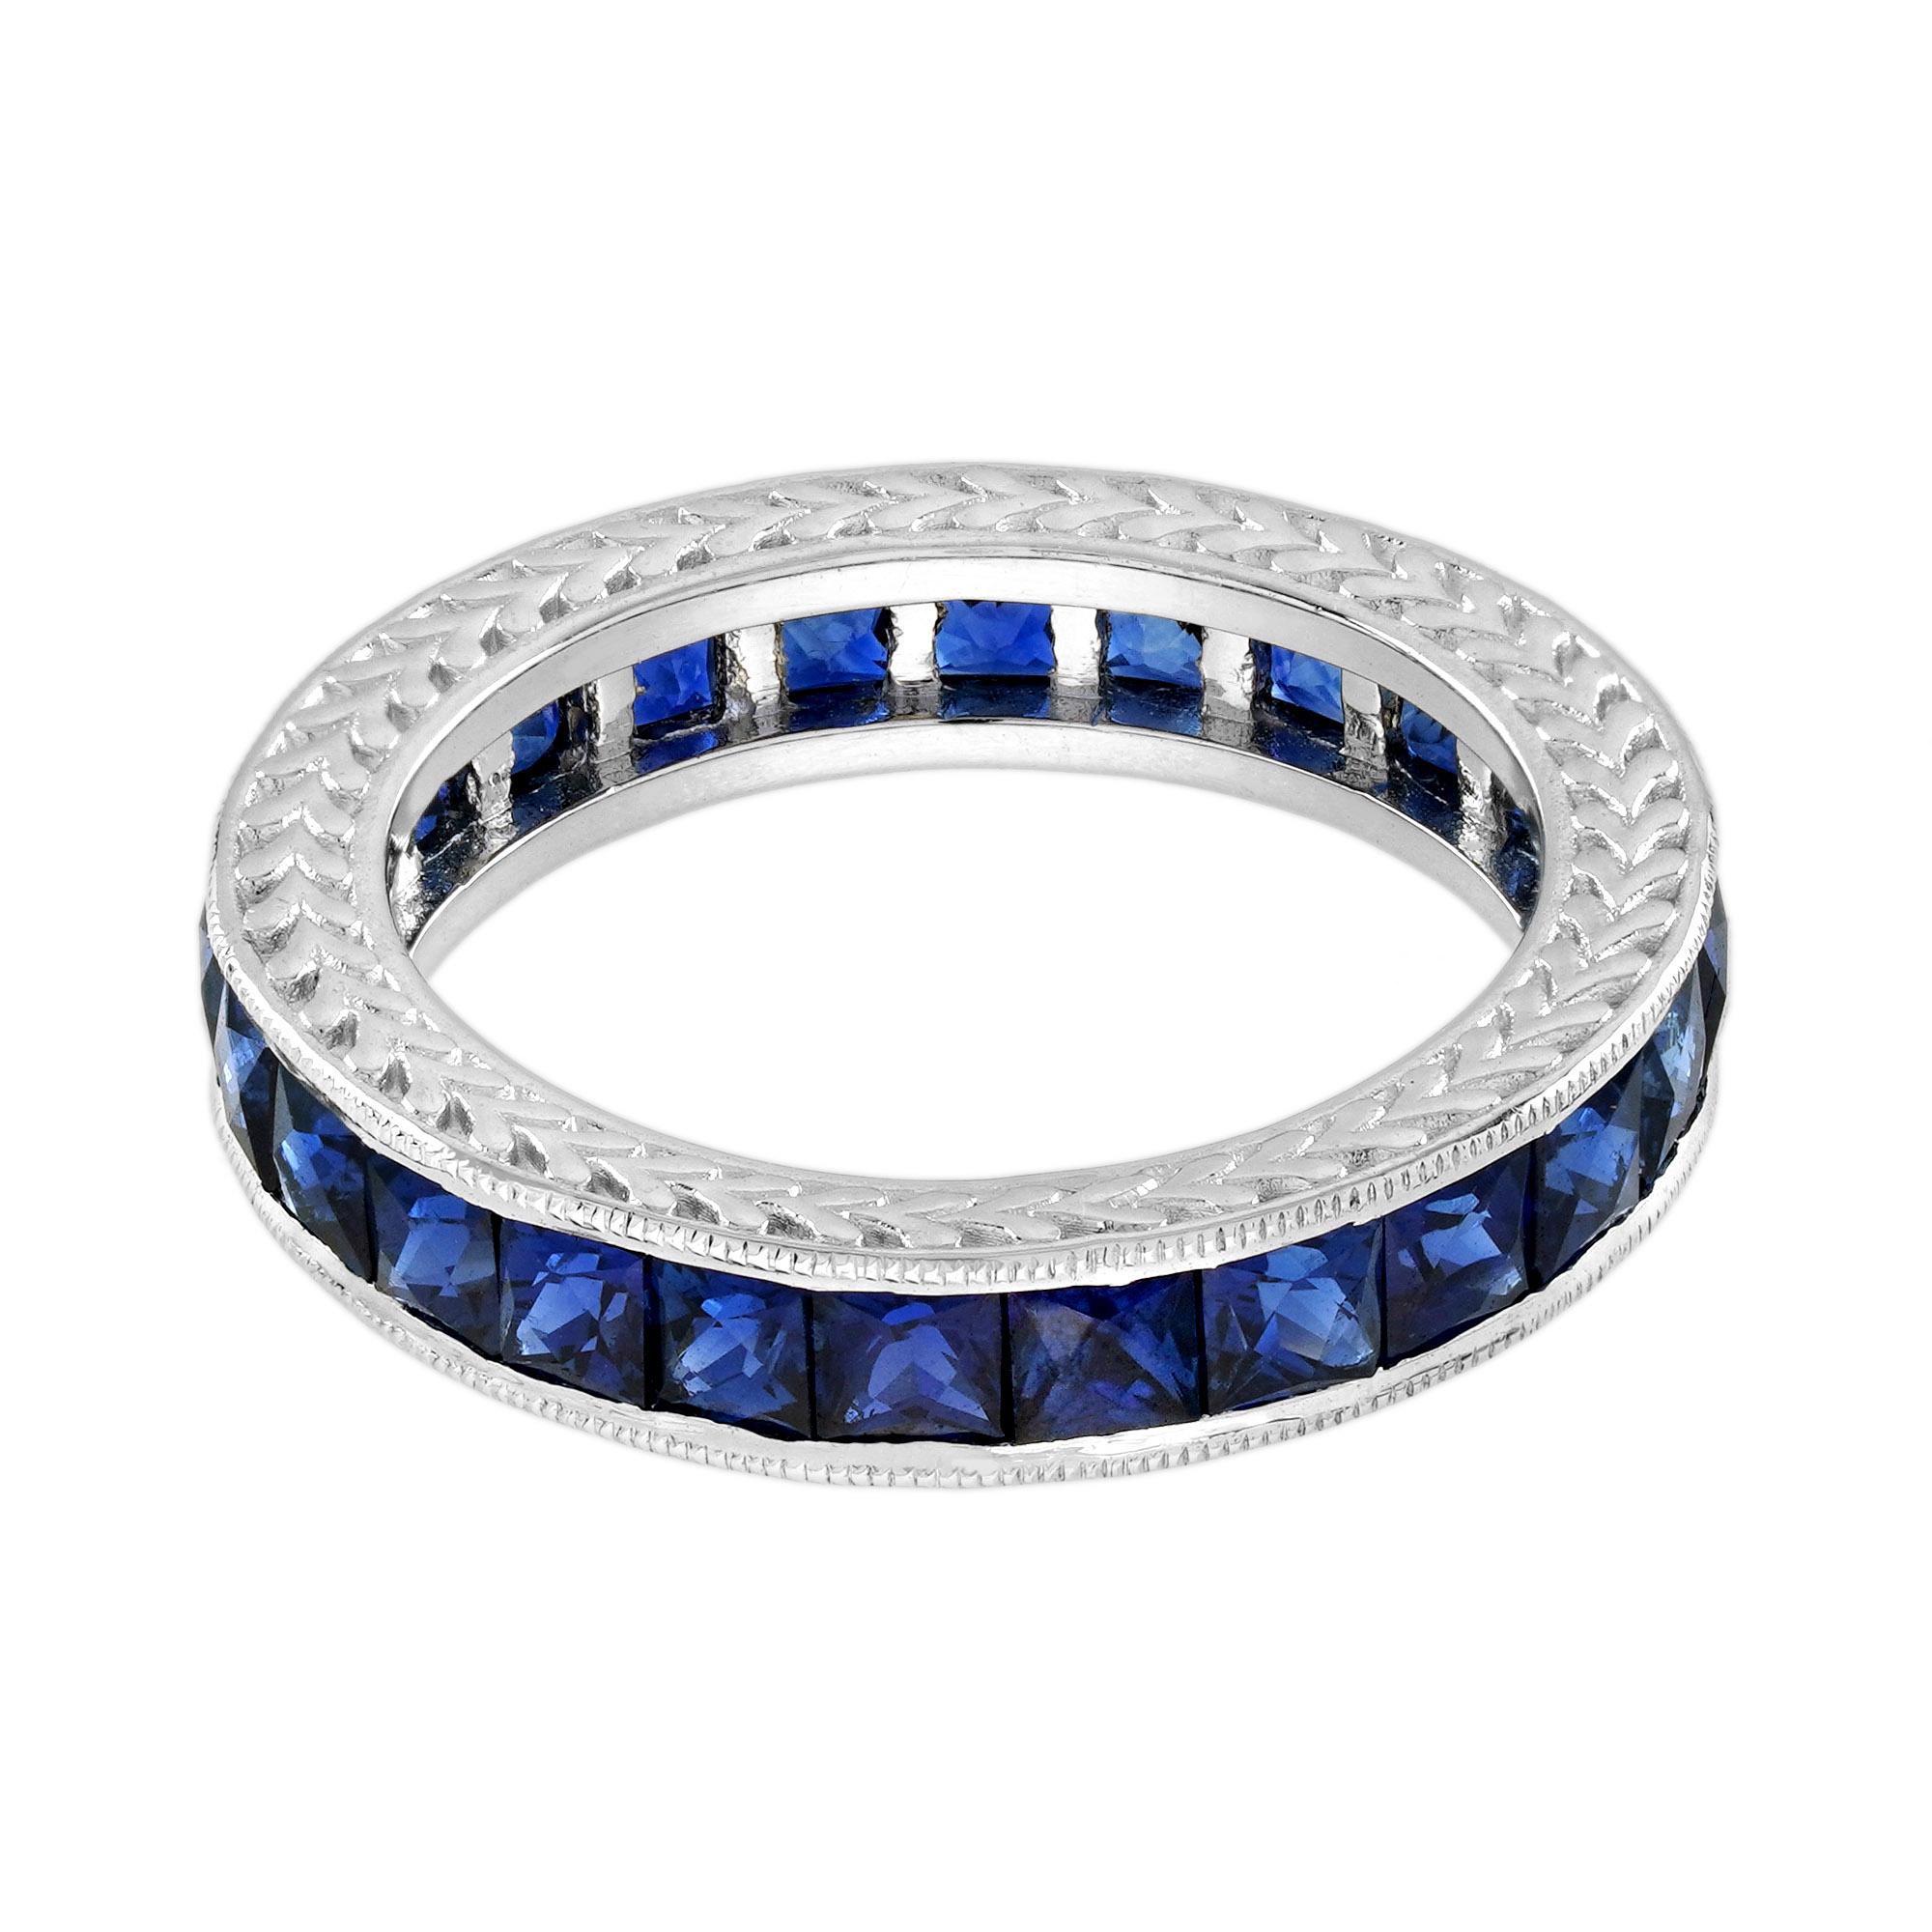 3.25 Ct. Blue Sapphire Antique Style Eternity Band Ring in Platinum 950 In New Condition For Sale In Bangkok, TH